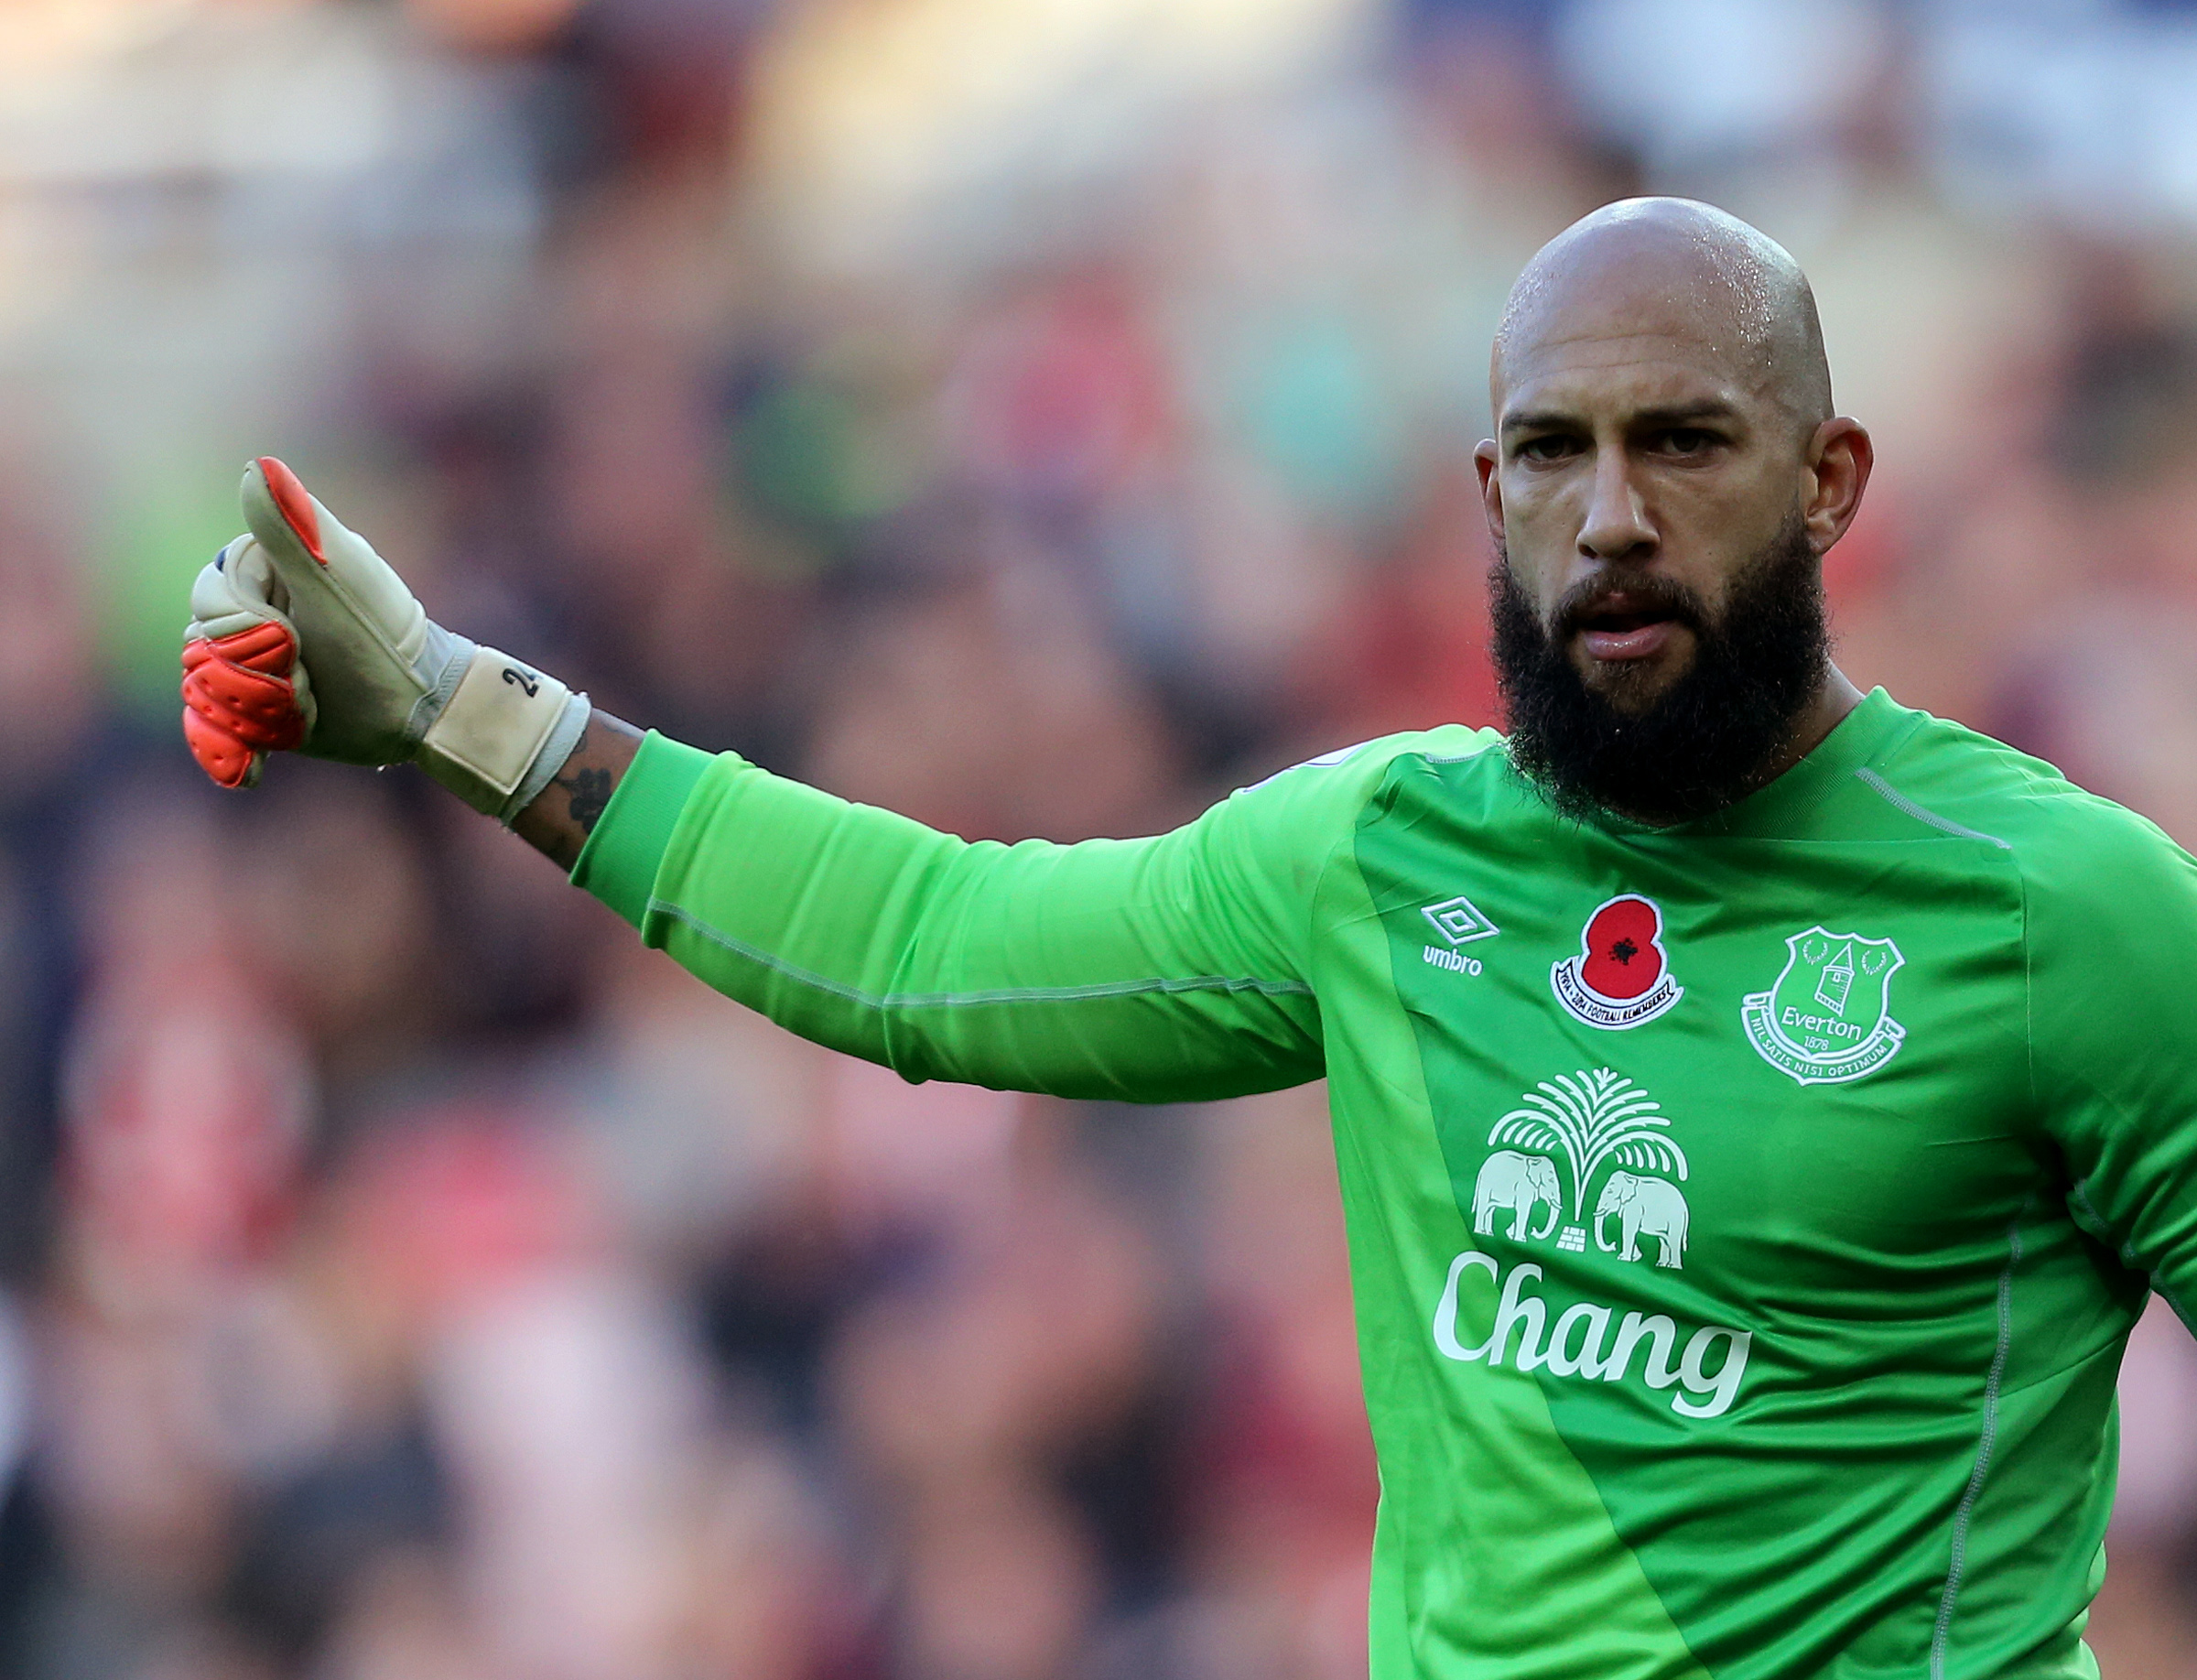 Soccer star Tim Howard is returning to the field to play goalie